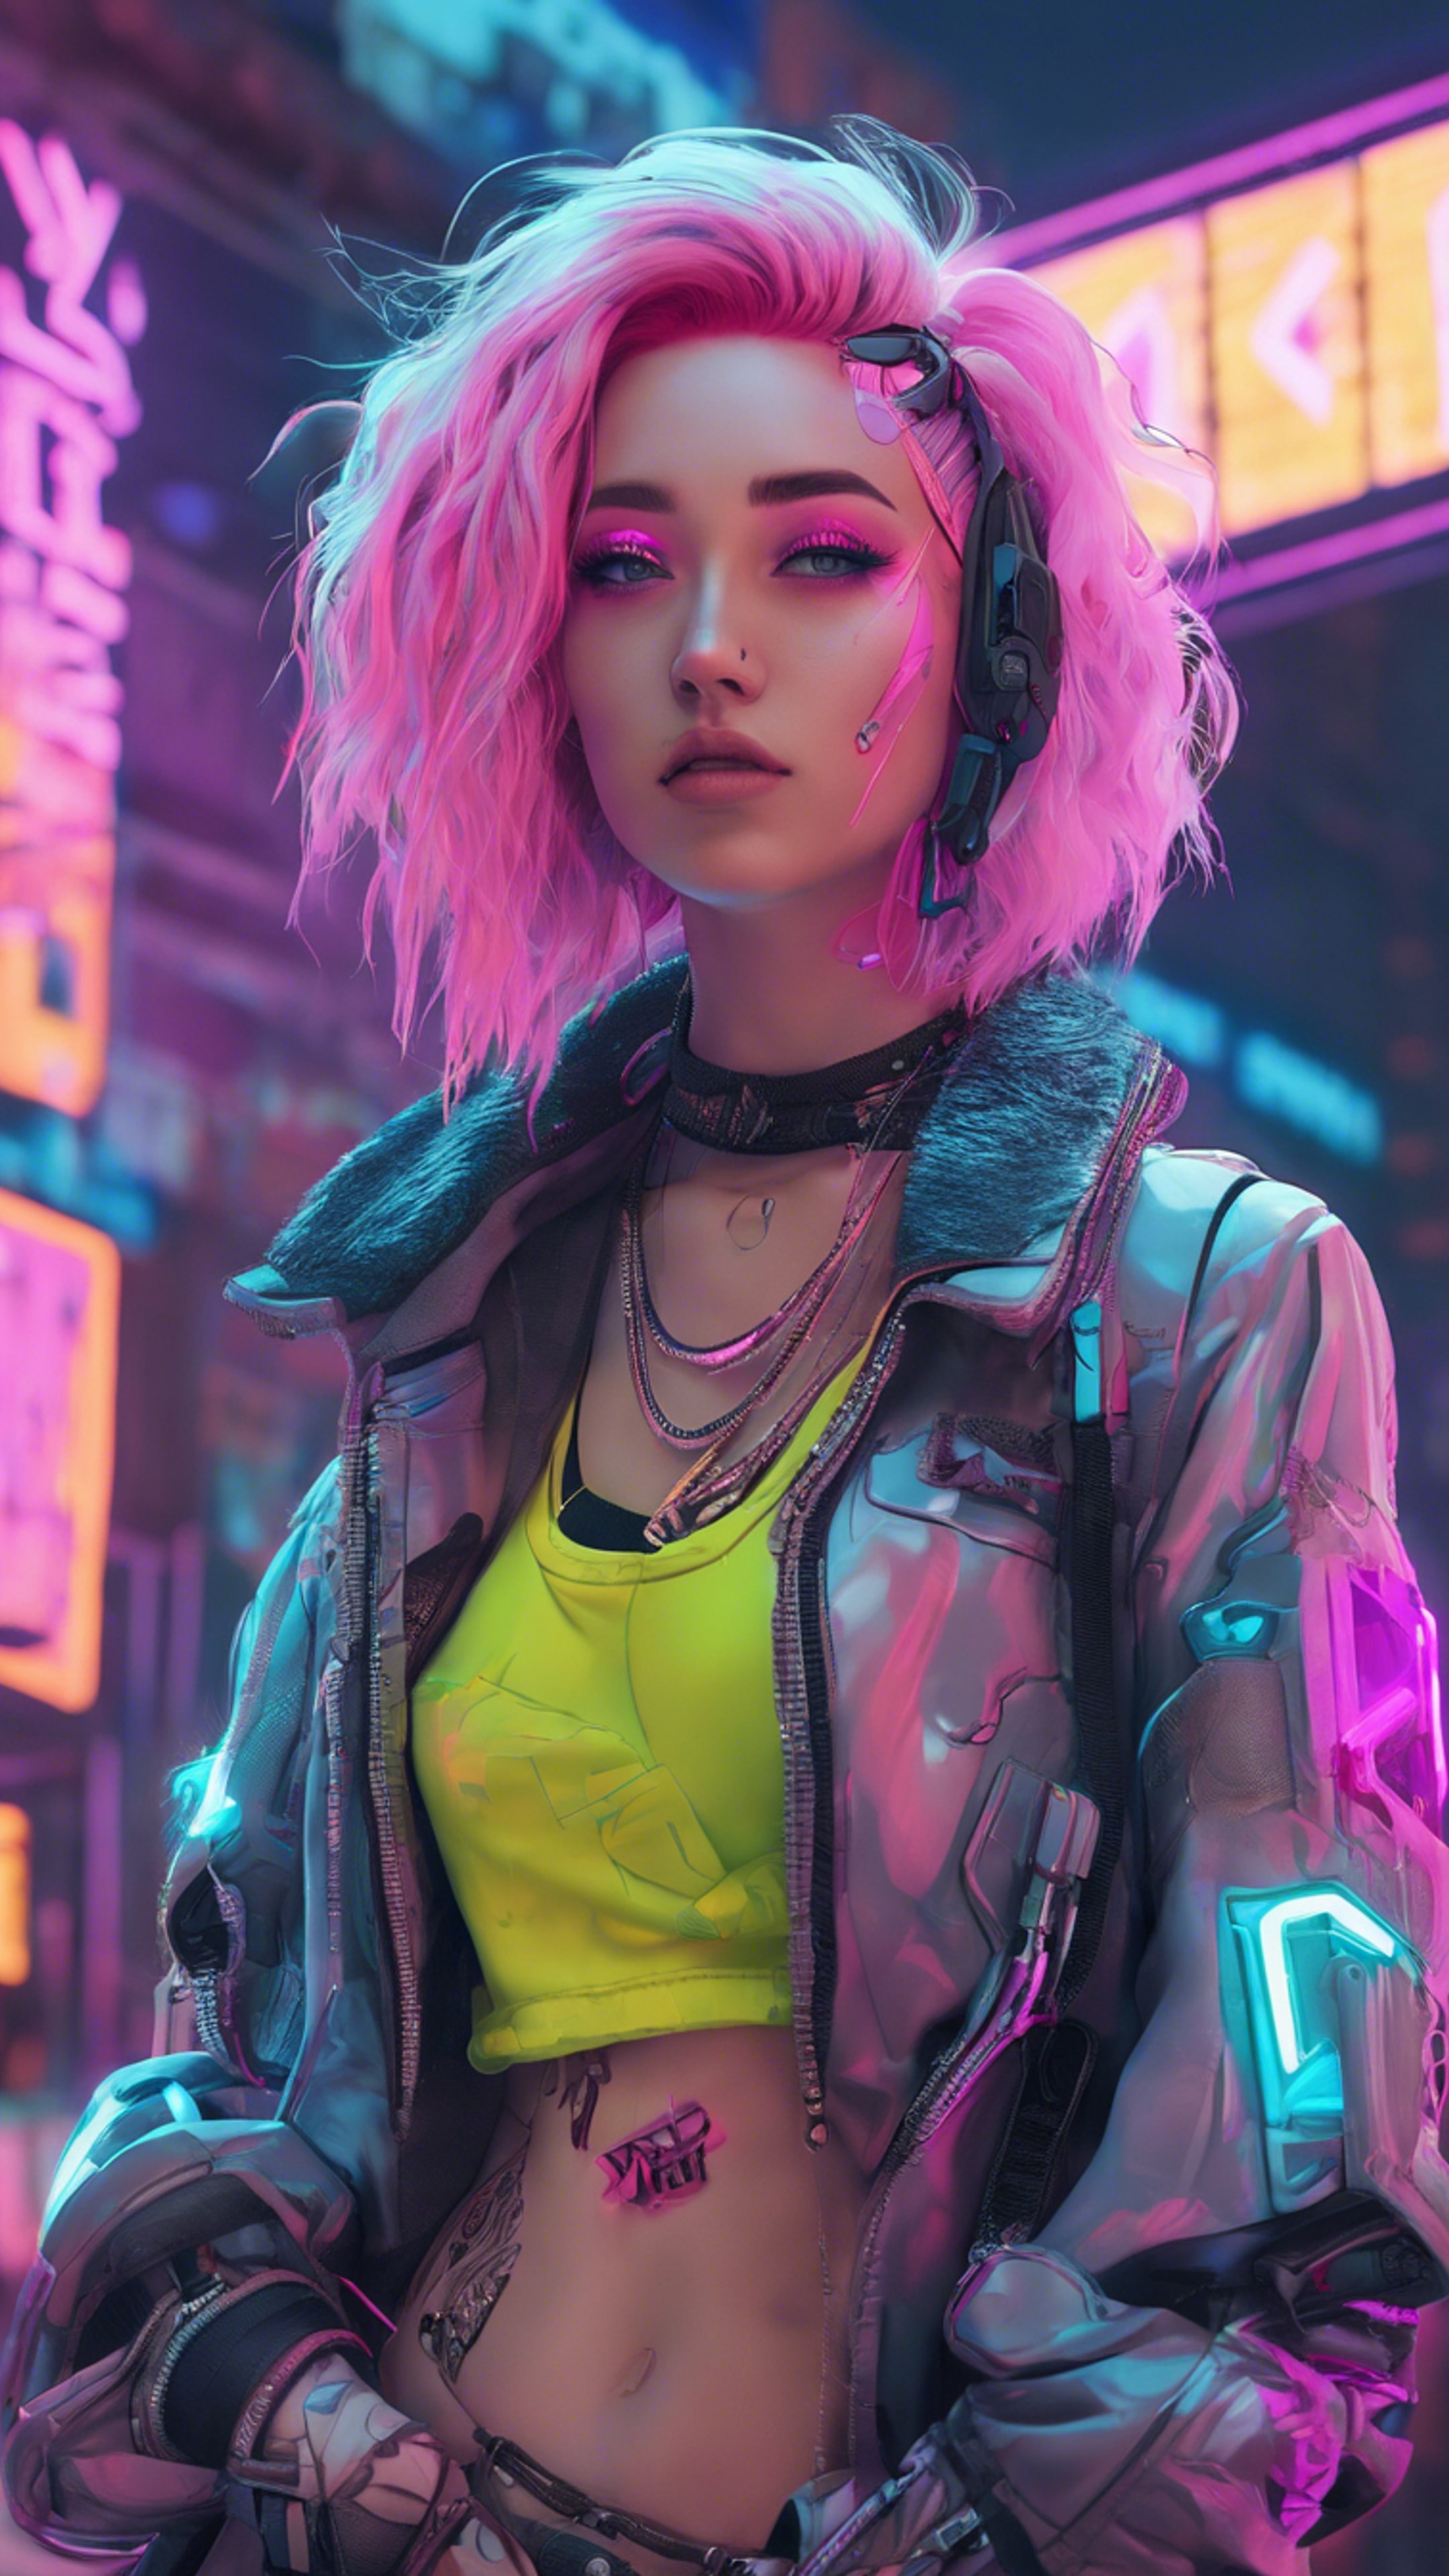 A pastel cyberpunk girl with brightly colored hair, standing in front of a neon sign. Tapeta na zeď[dbbad63d7b584975aa4e]